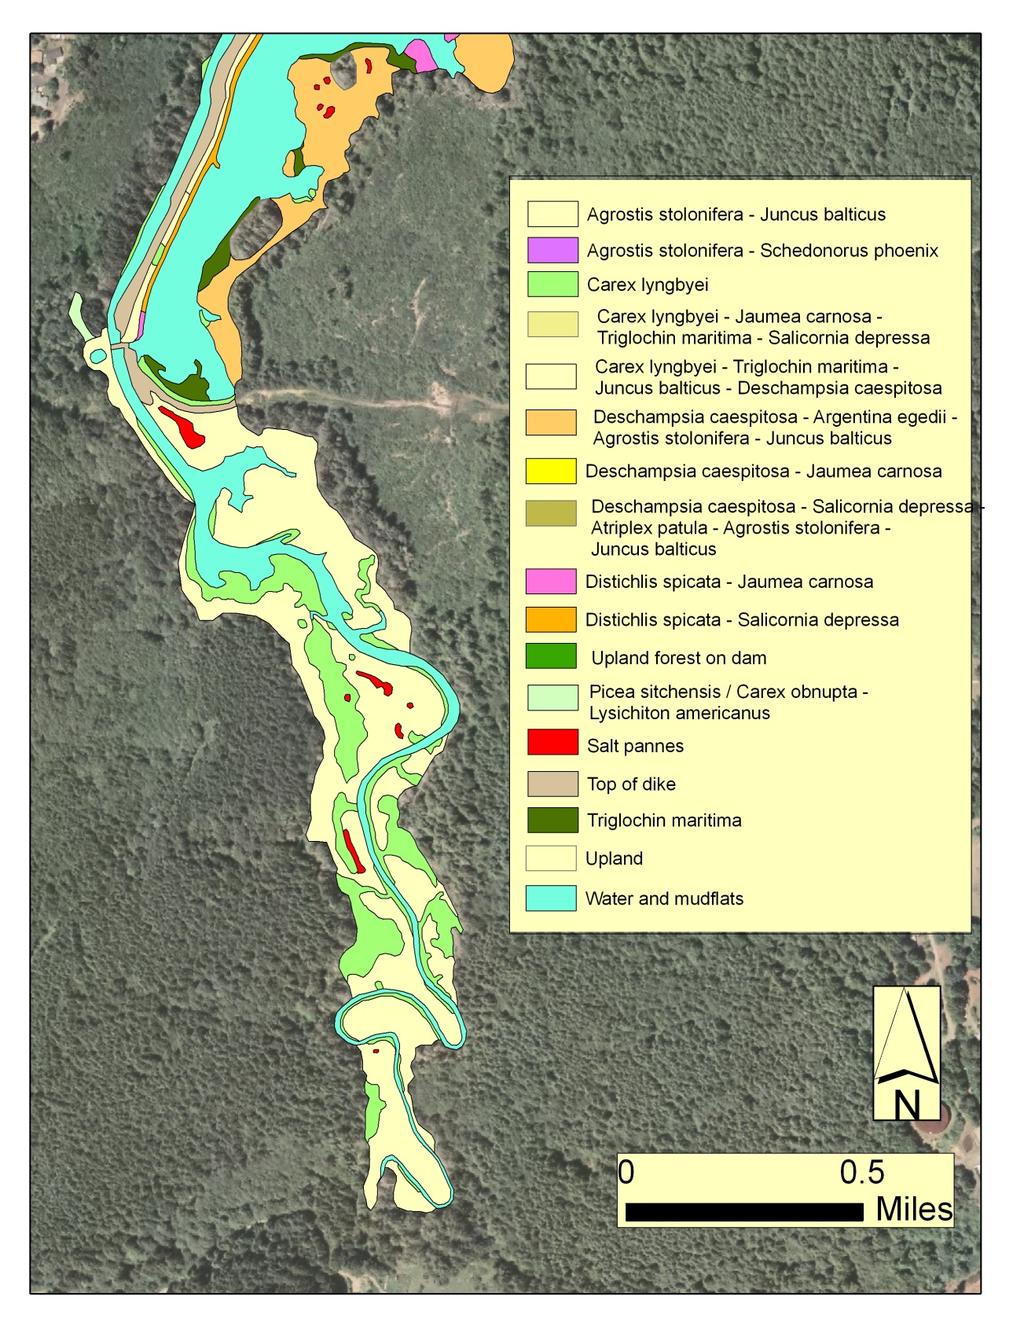 OR Detailed wetland data also